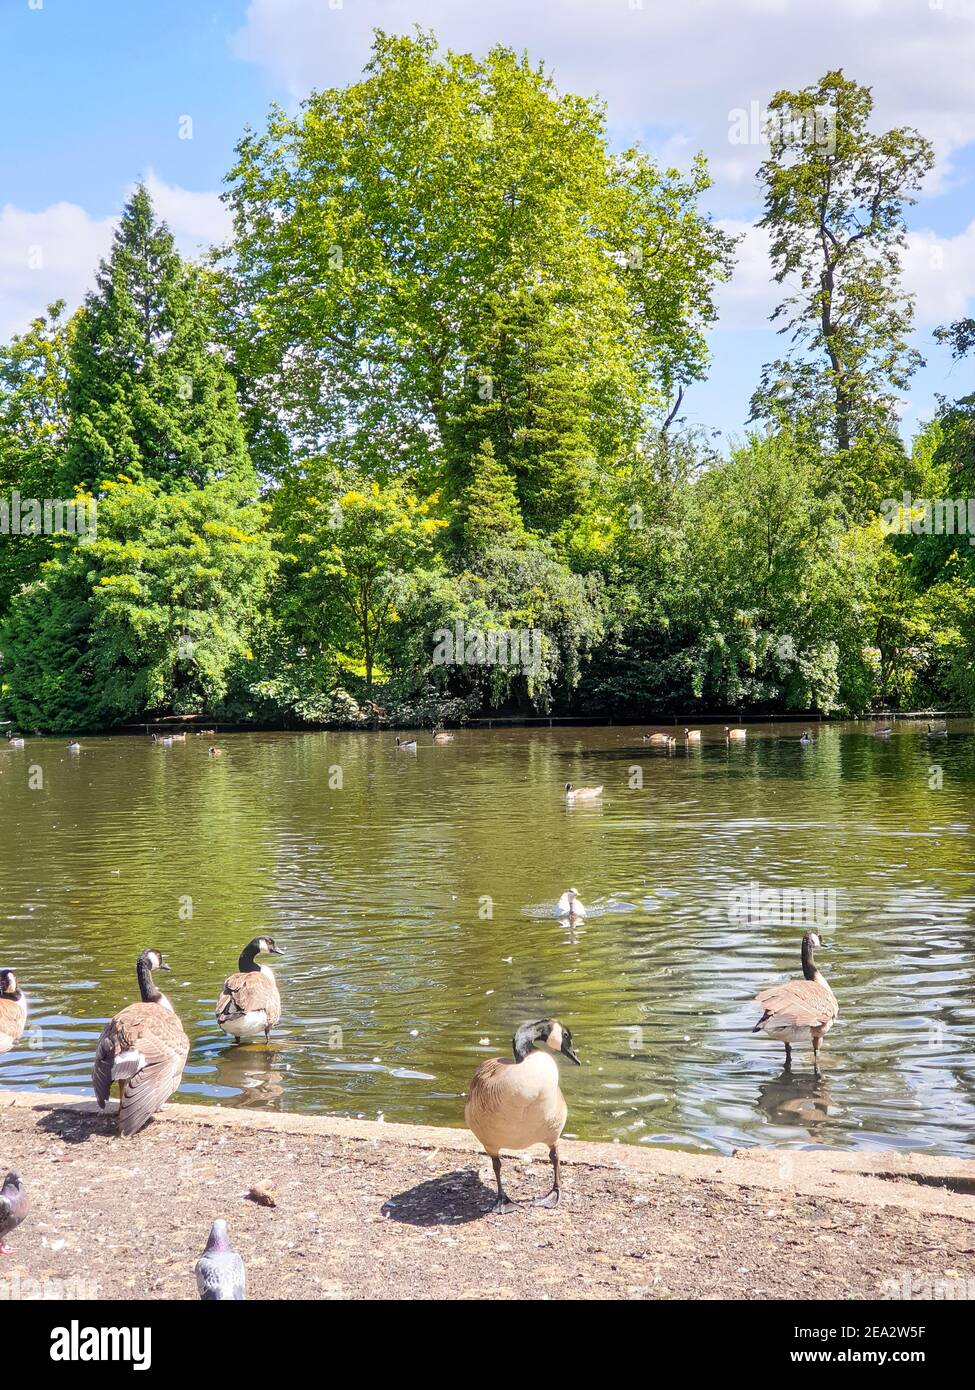 Canada goose birds, Cannon Hill Country Park at Summer in Birmingham,  England Stock Photo - Alamy